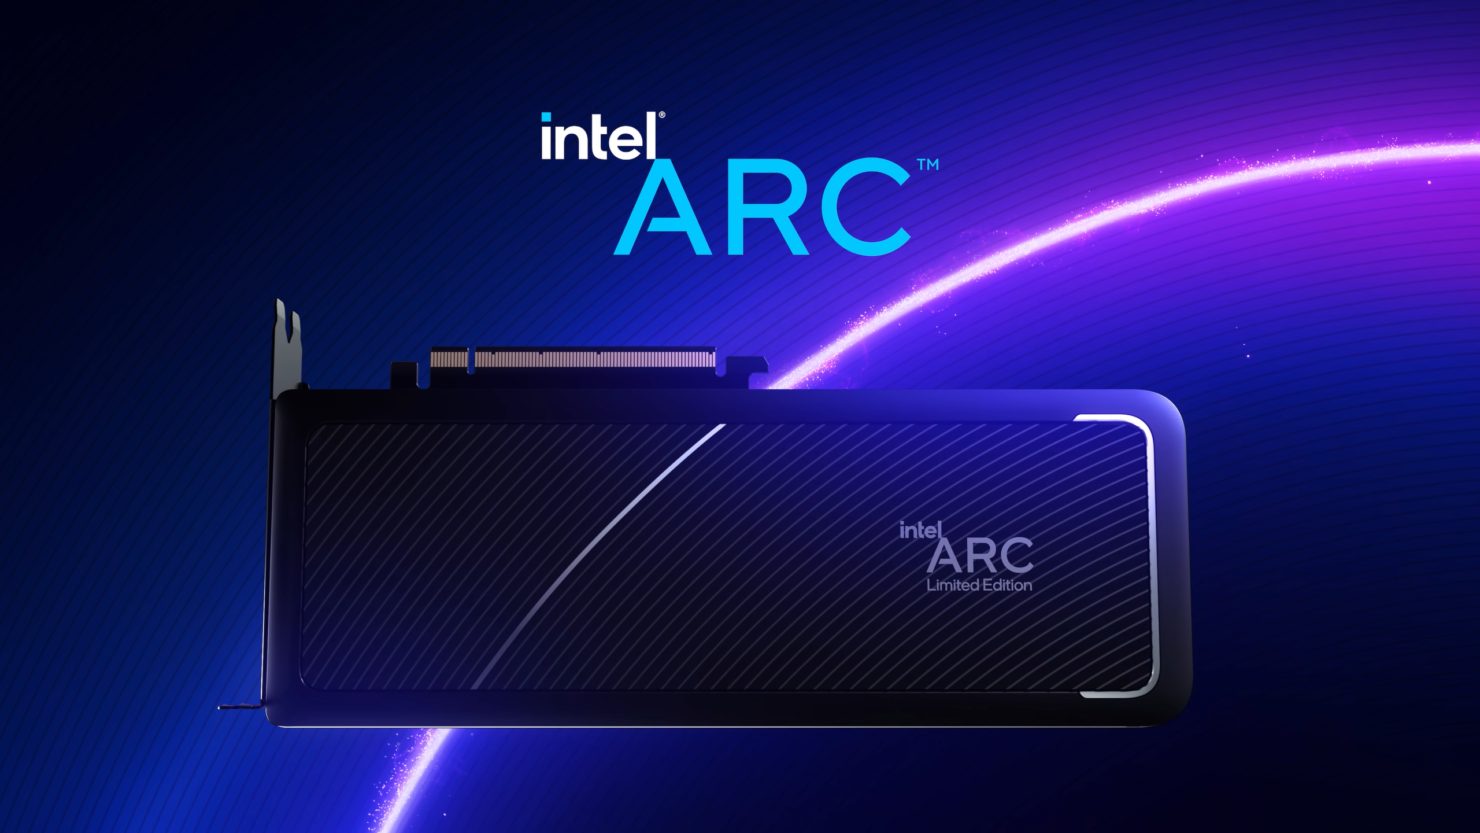 Intel Shows First Images of Arc Desktop GPUs, Release Winter 2022